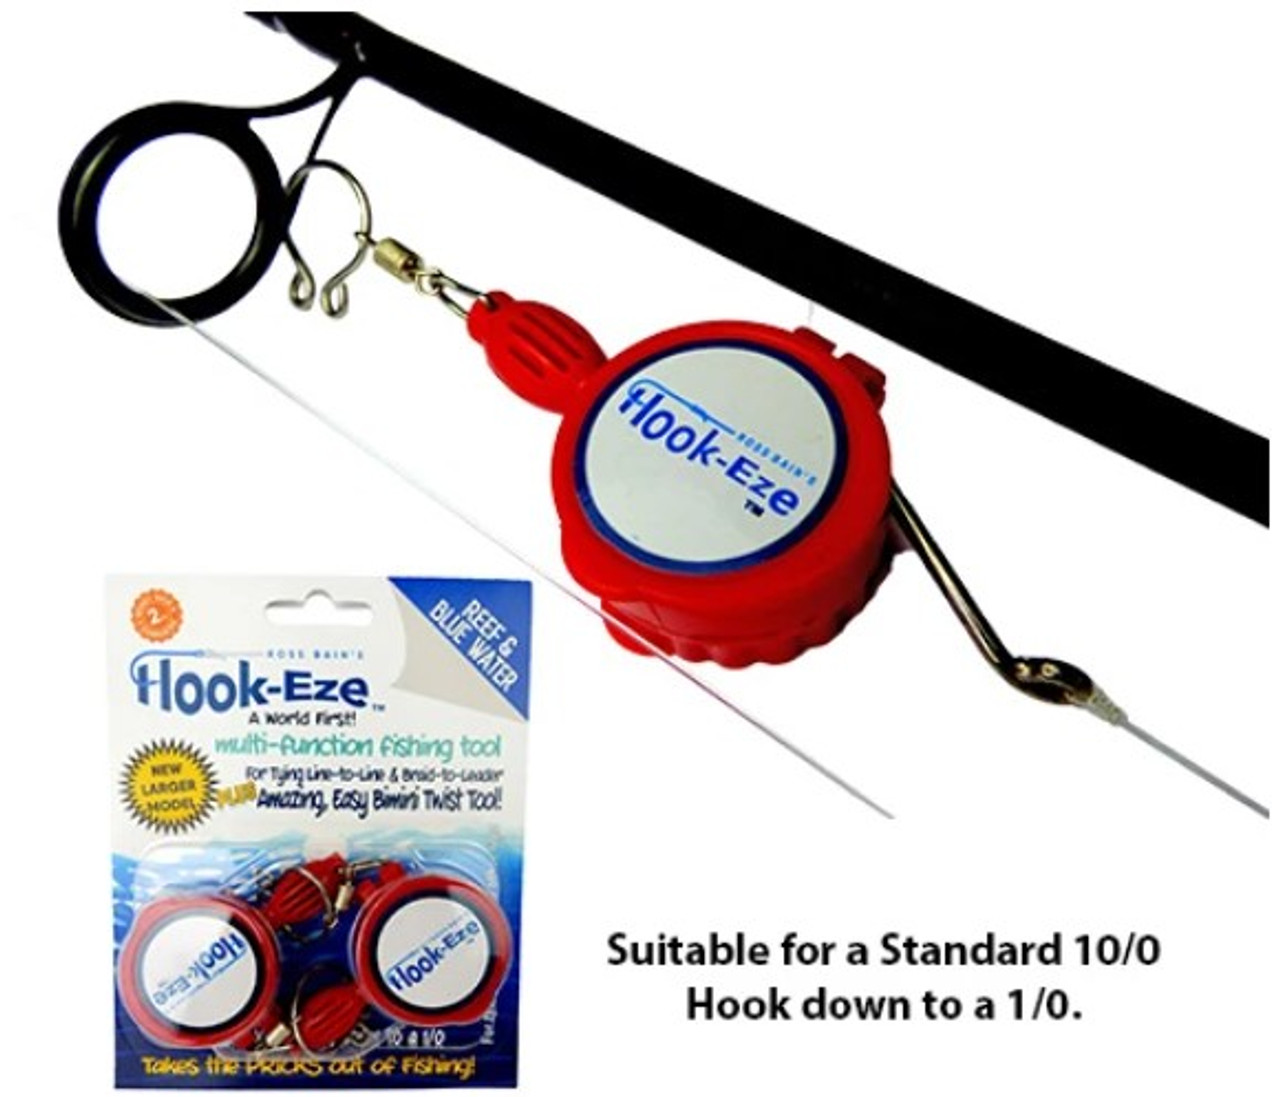 HOOK-EZE Fishing Knot Tying Tool - Fishing Accessories for tieing